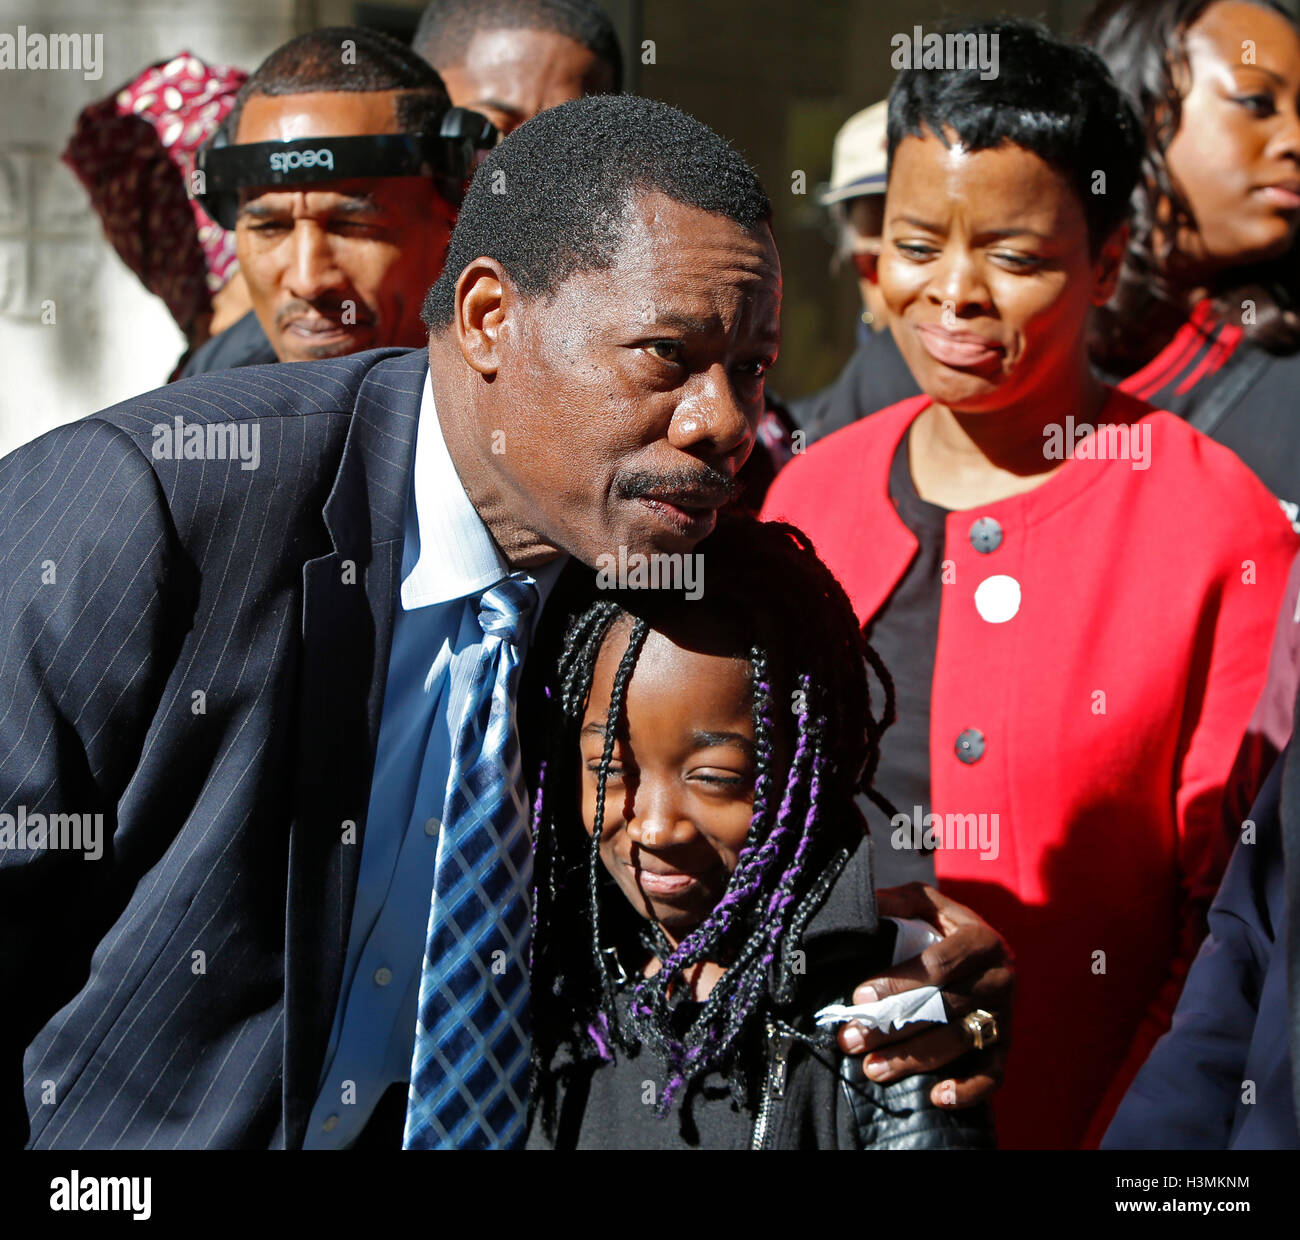 New York City, United States. 10th Oct, 2016. NY city council member Mathieu Eugene with young constituent. Rev Al Sharpton gathered with members of the NYC City Council in Midtown Manhattan to announce support for Haitians displaced by Hurricane Matthew, & to eulogize late Kings County district attorney Ken Thompson who passed away unexpectedly from cancer the day before. Credit:  Andy Katz/Pacific Press/Alamy Live News Stock Photo